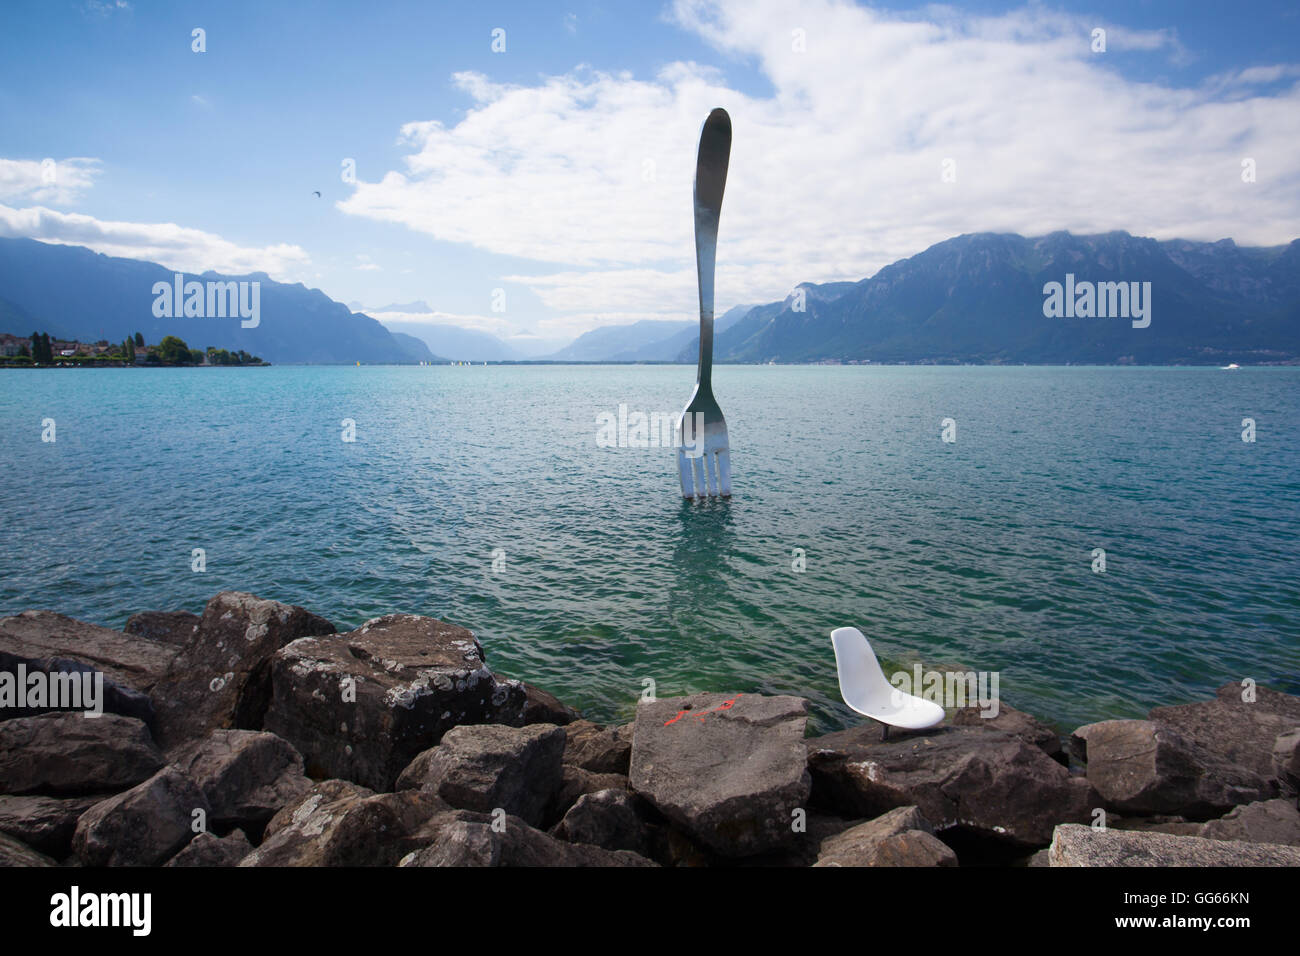 Vevey, Switzerland - July 8,2015: Giant steel fork in water of Geneva lake, Vevey, Switzerland.The fork went up in 1995 to mark Stock Photo